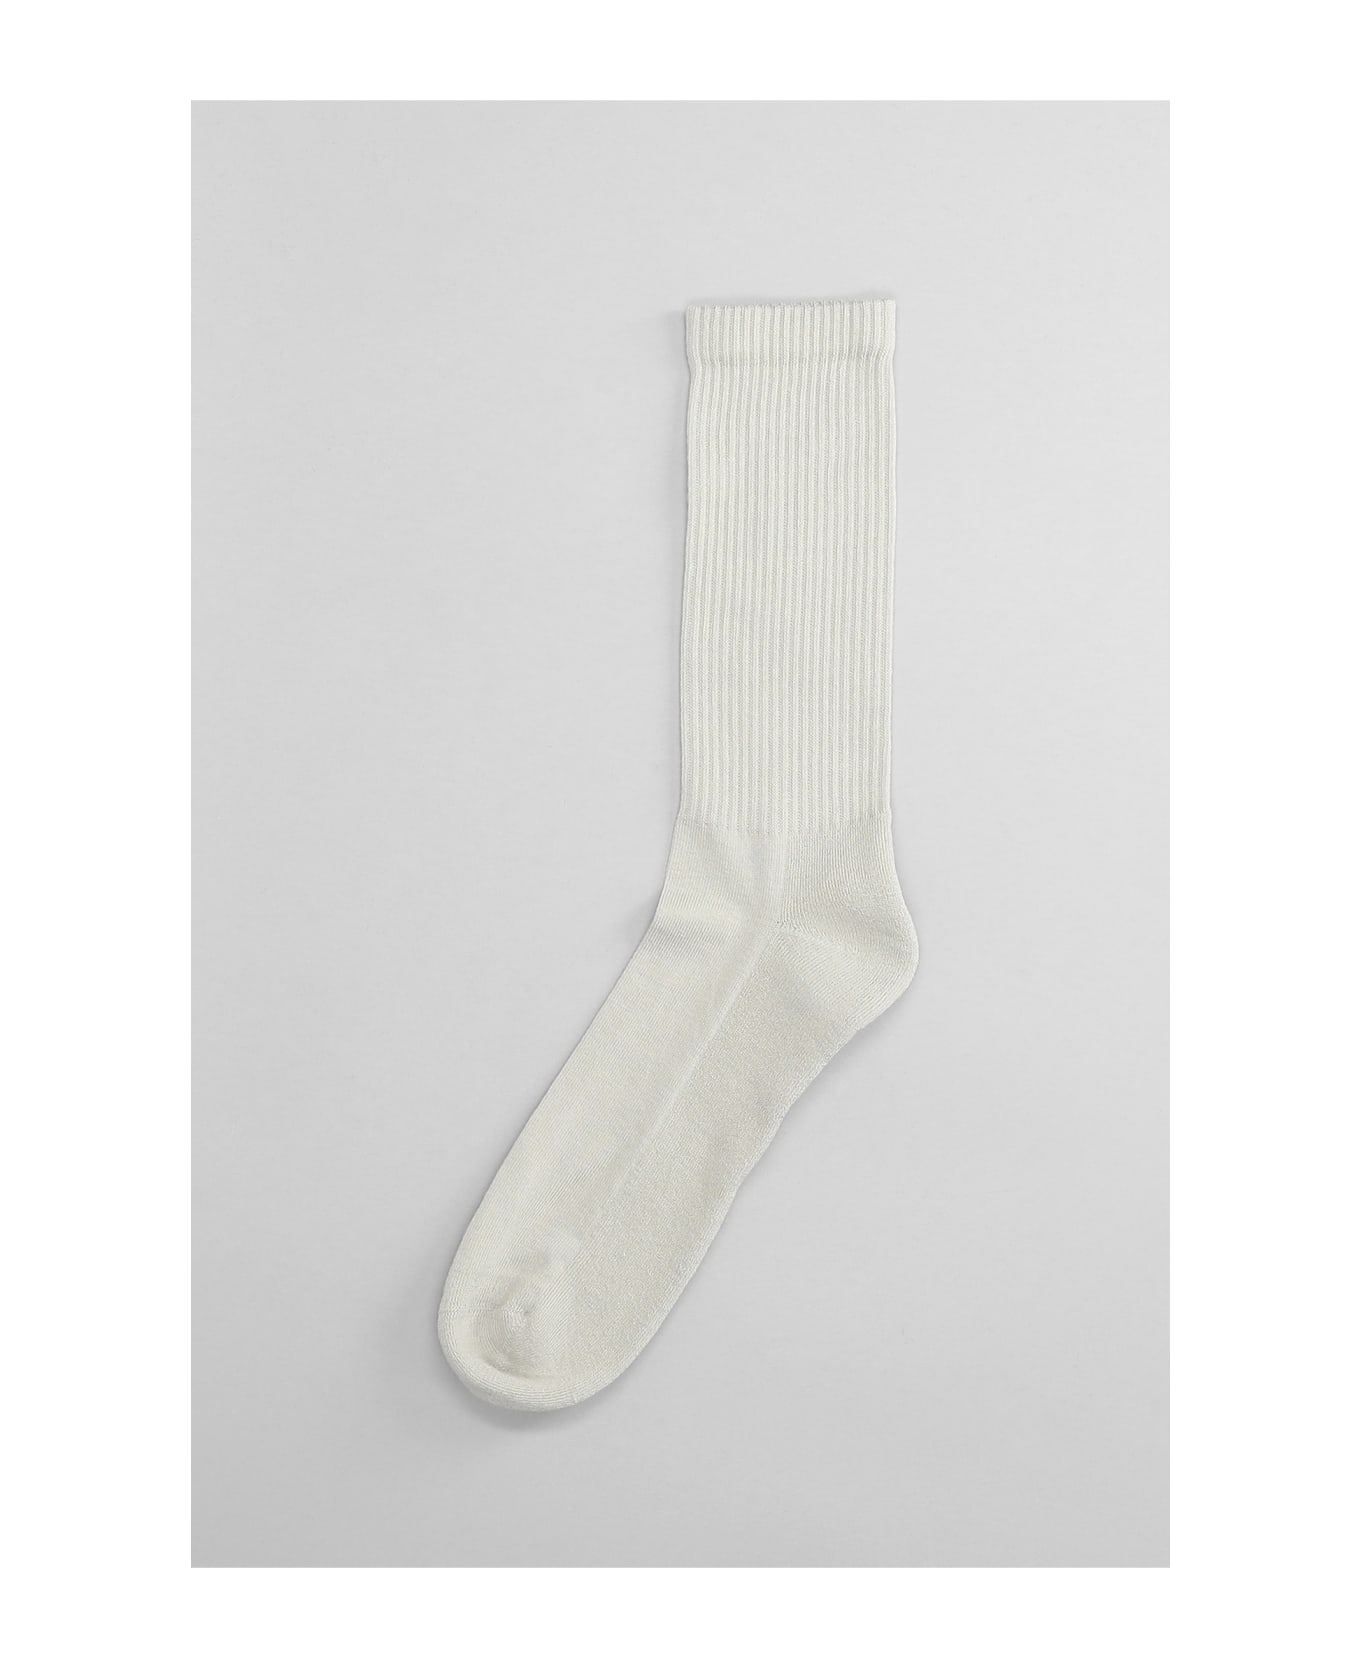 44 Label Group Socks In Grey Cotton - White